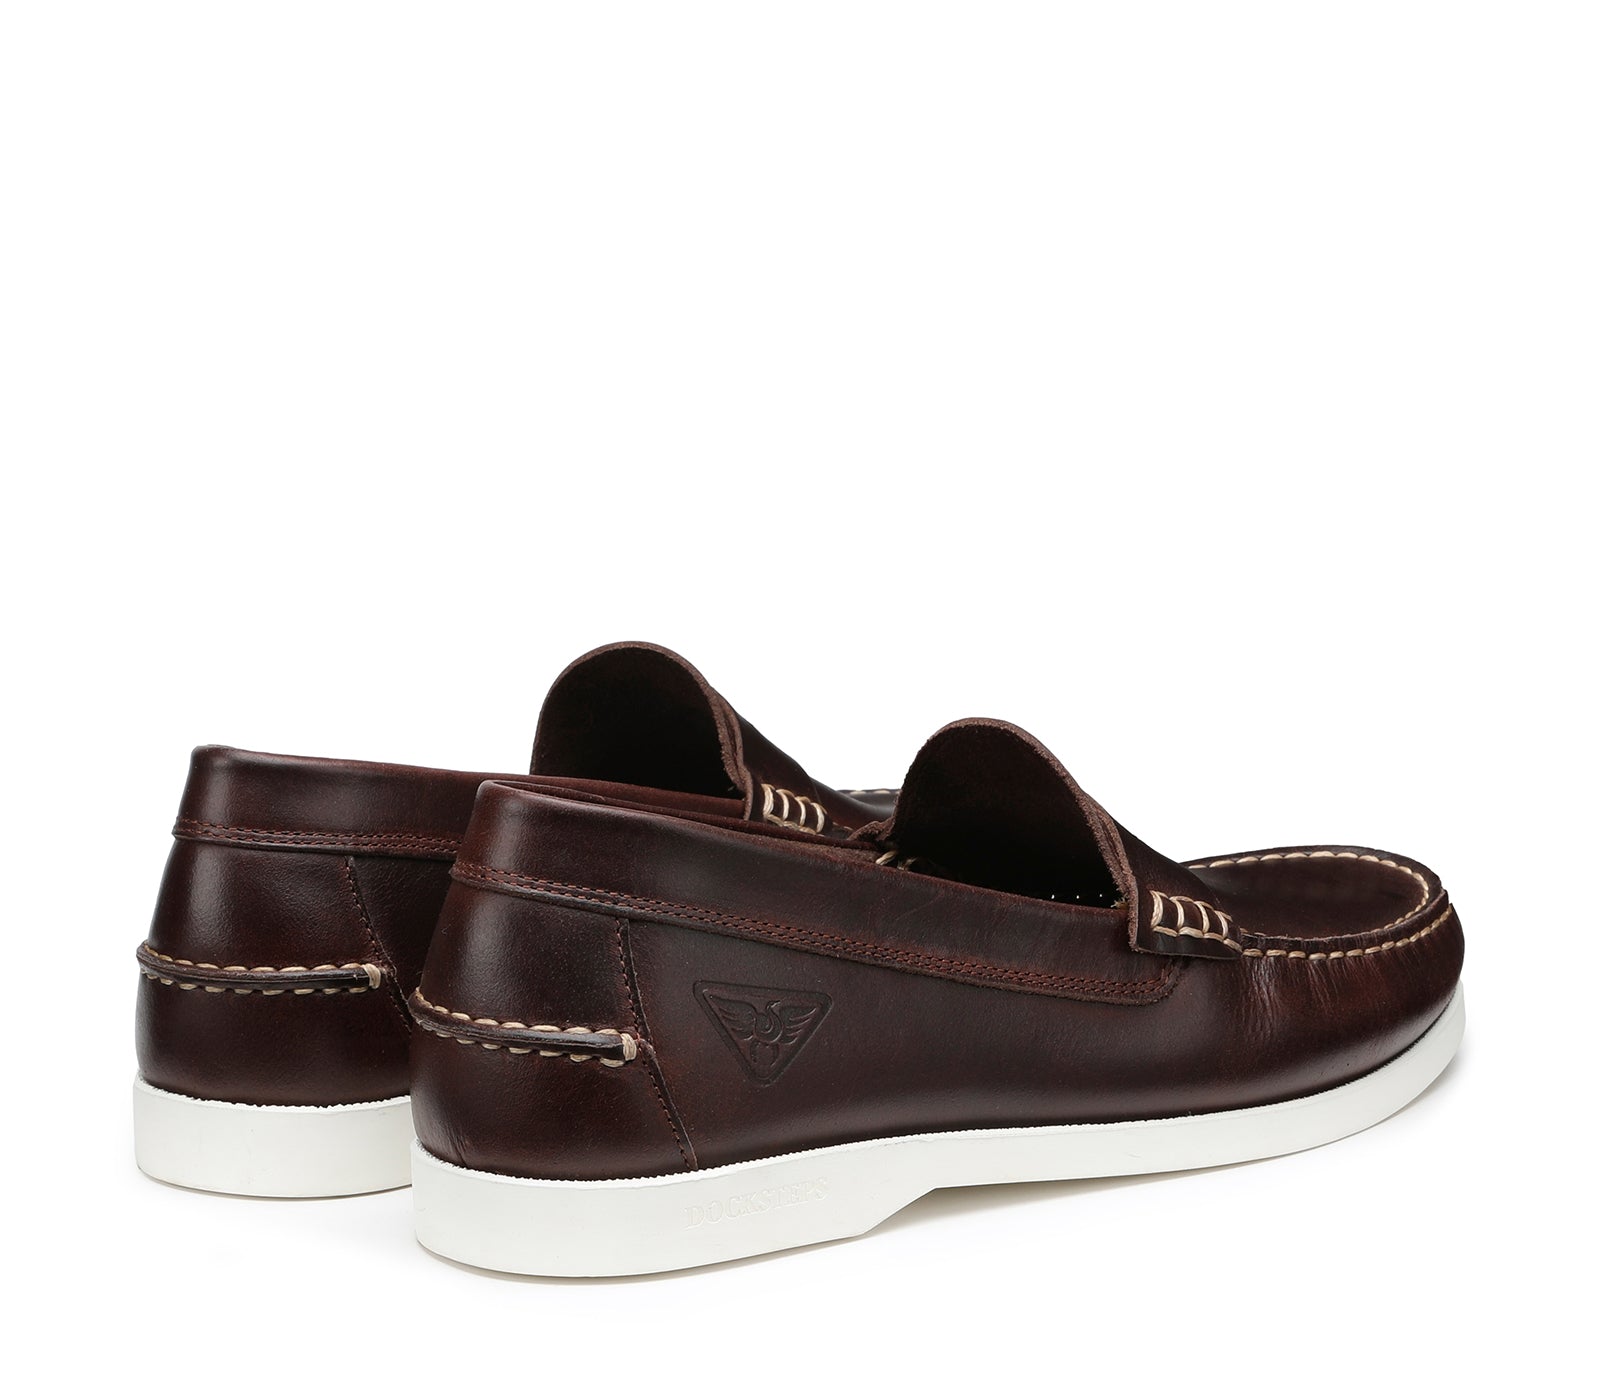 Men's Moccasins in Brown Leather